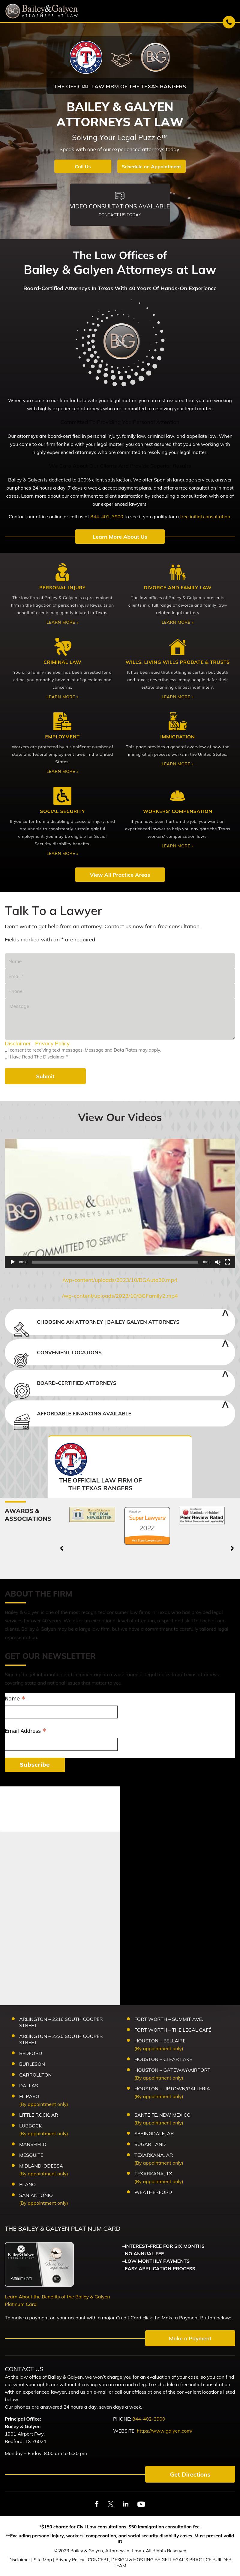 Bailey & Galyen, Attorneys at Law - Bedford TX Lawyers